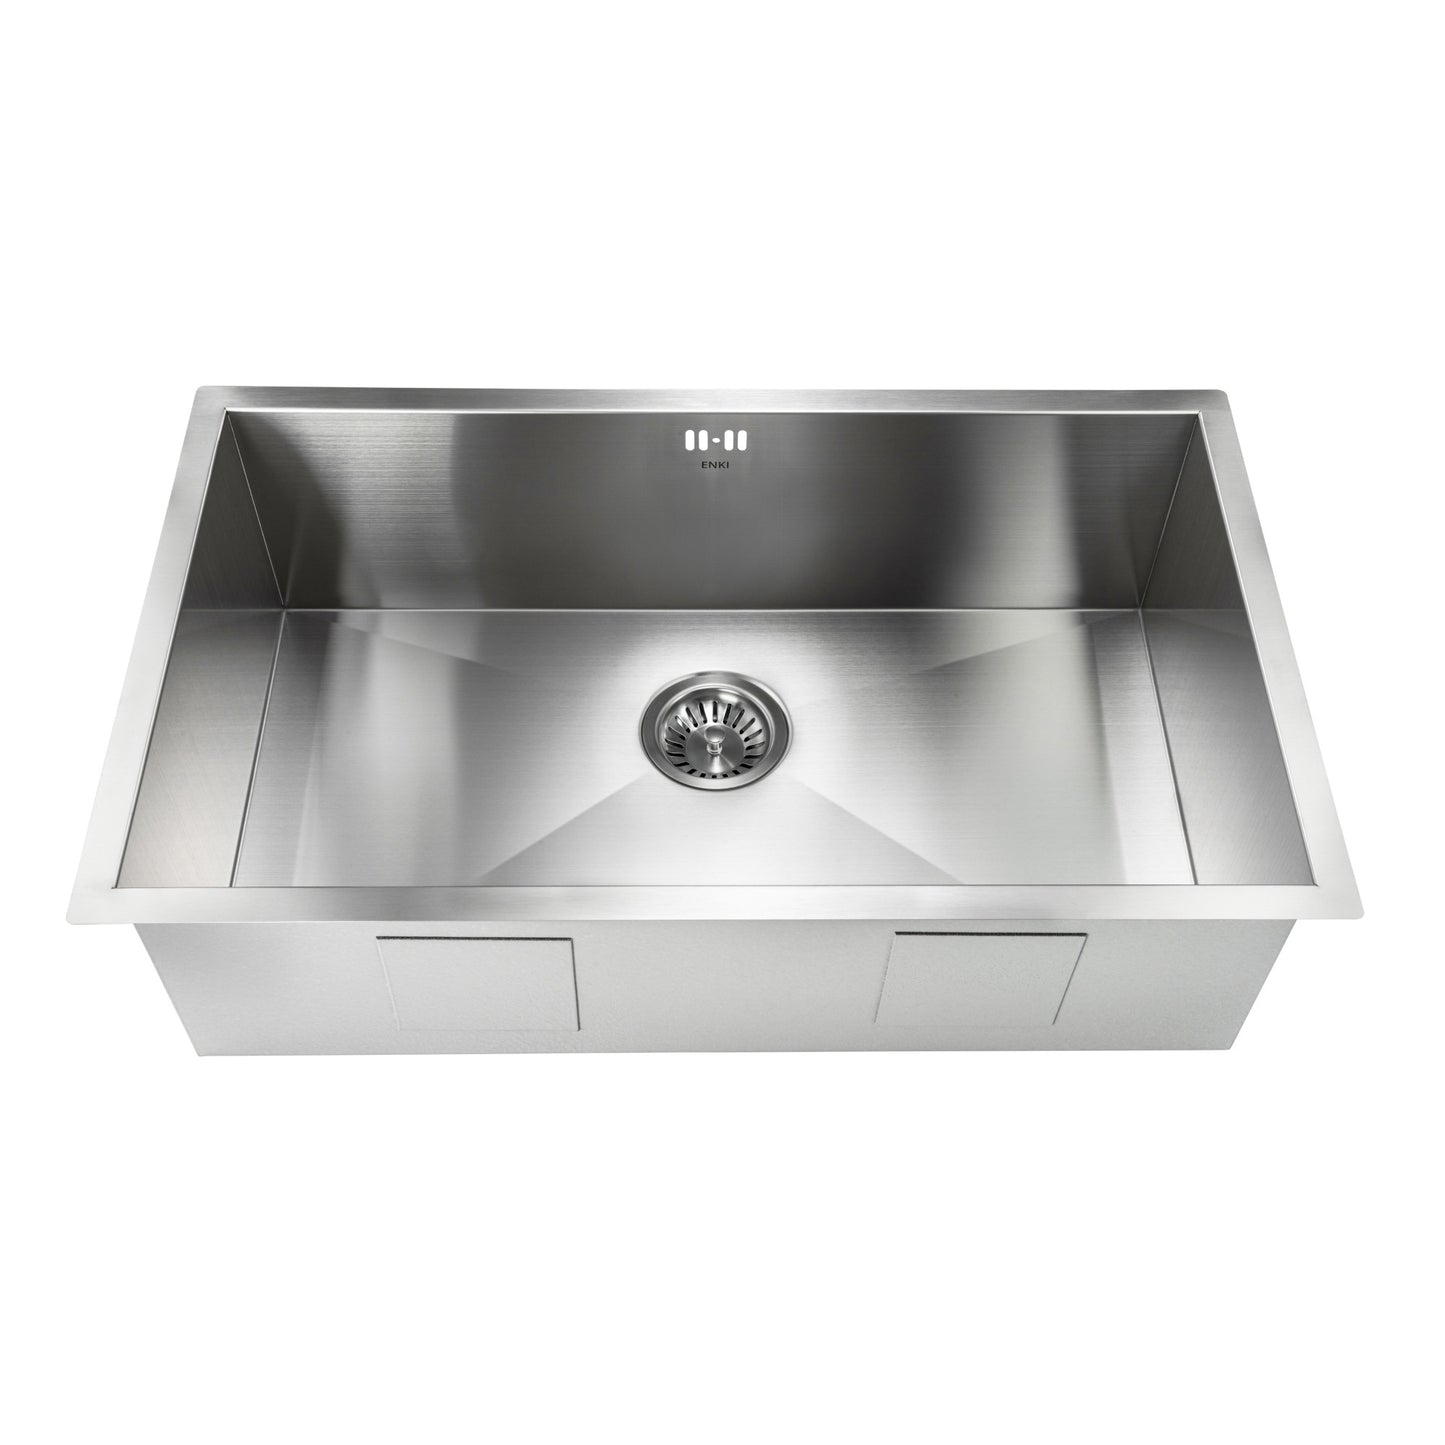 Bali 760mm x 455mm 1.0 bowl undermount or topmount kitchen sink with overflow - brushed stainless steel